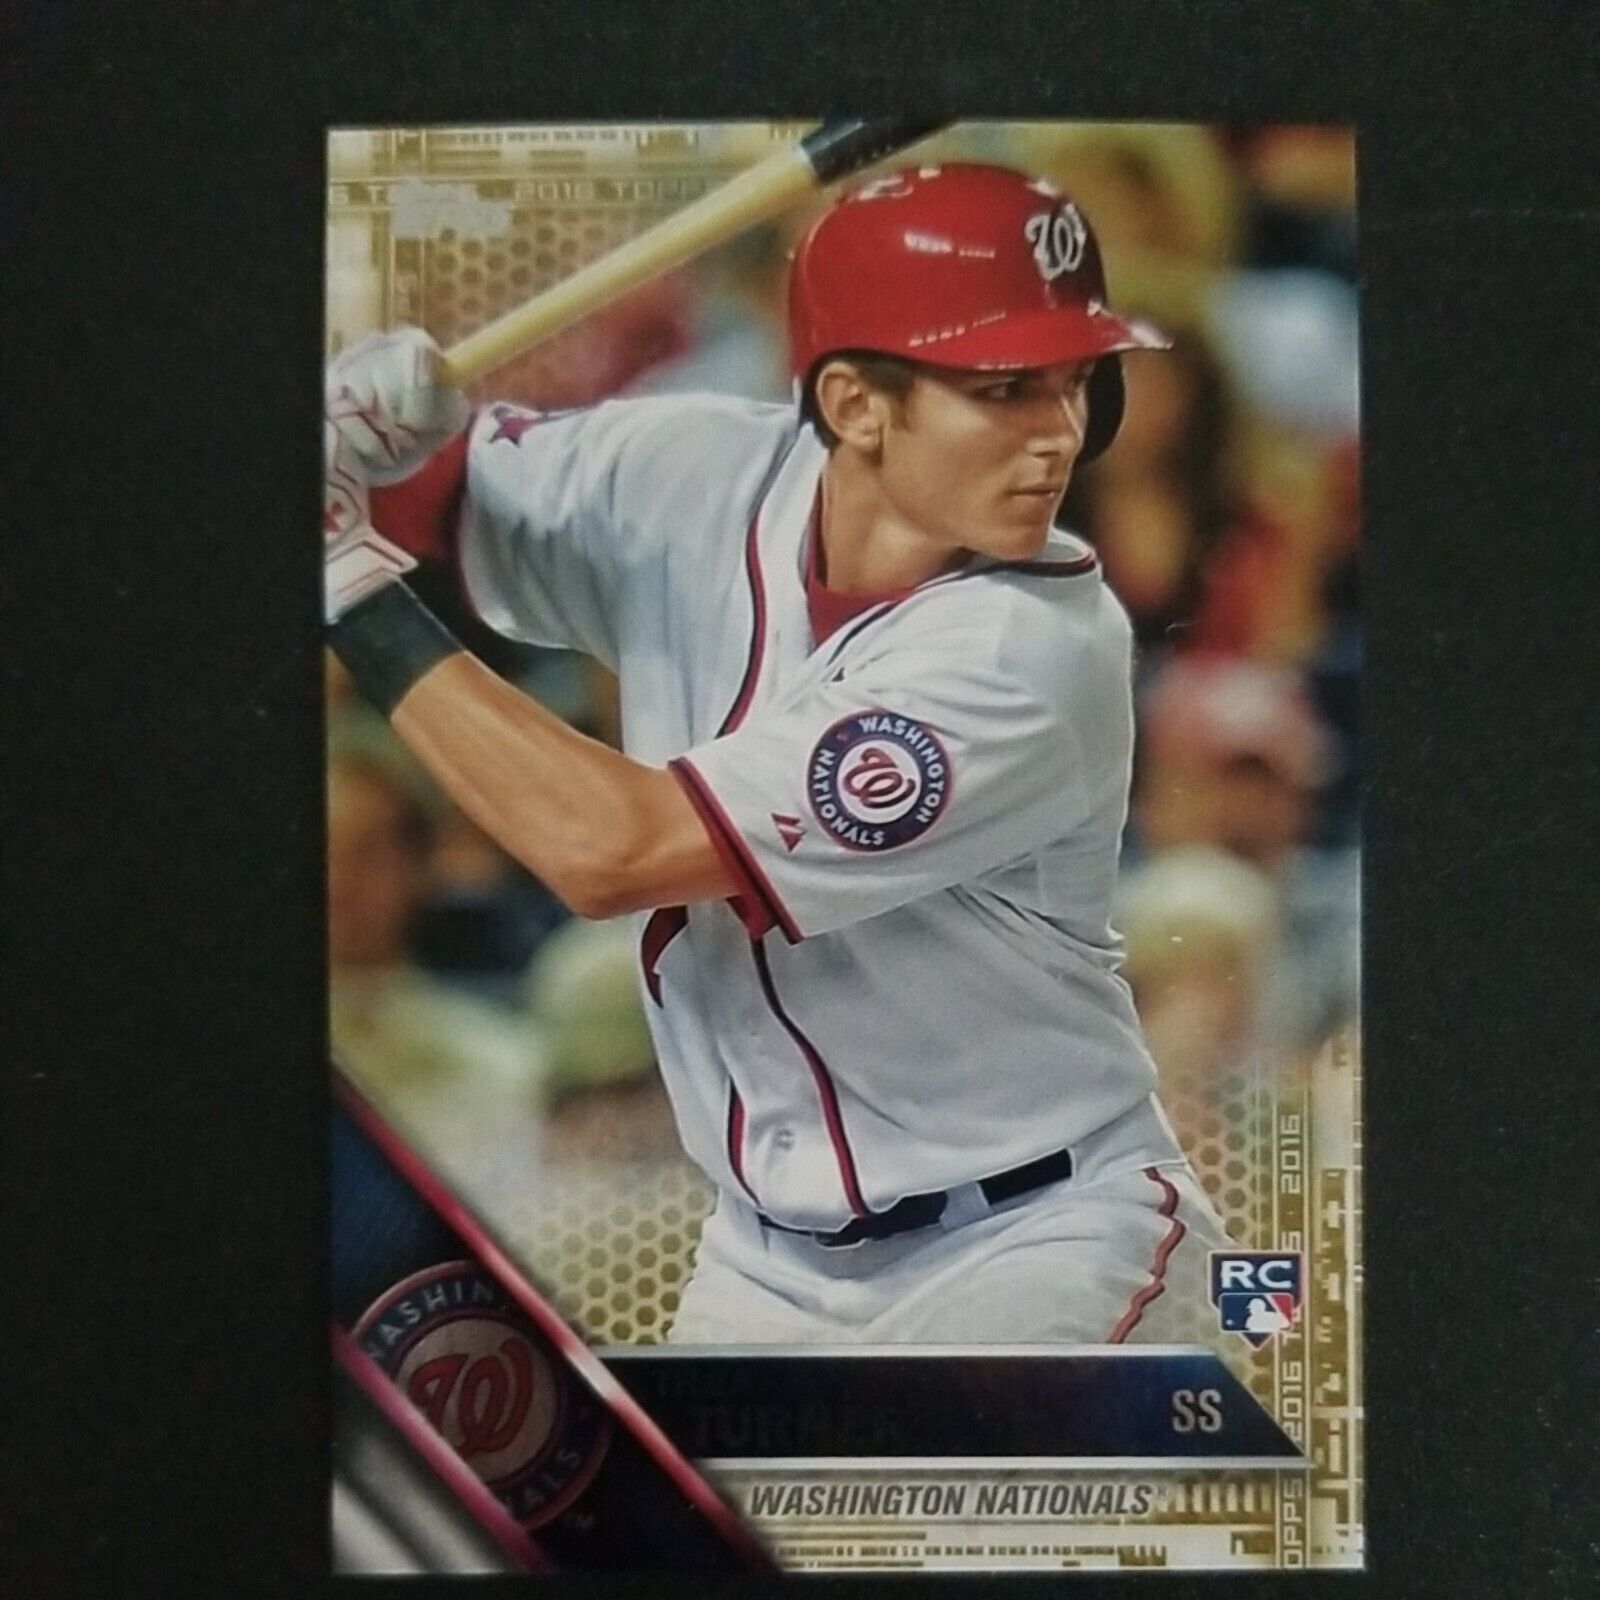 2016 Topps Trea Turner RC Rookie #/2016 Gold Parallel SP #103 Nationals Phillies